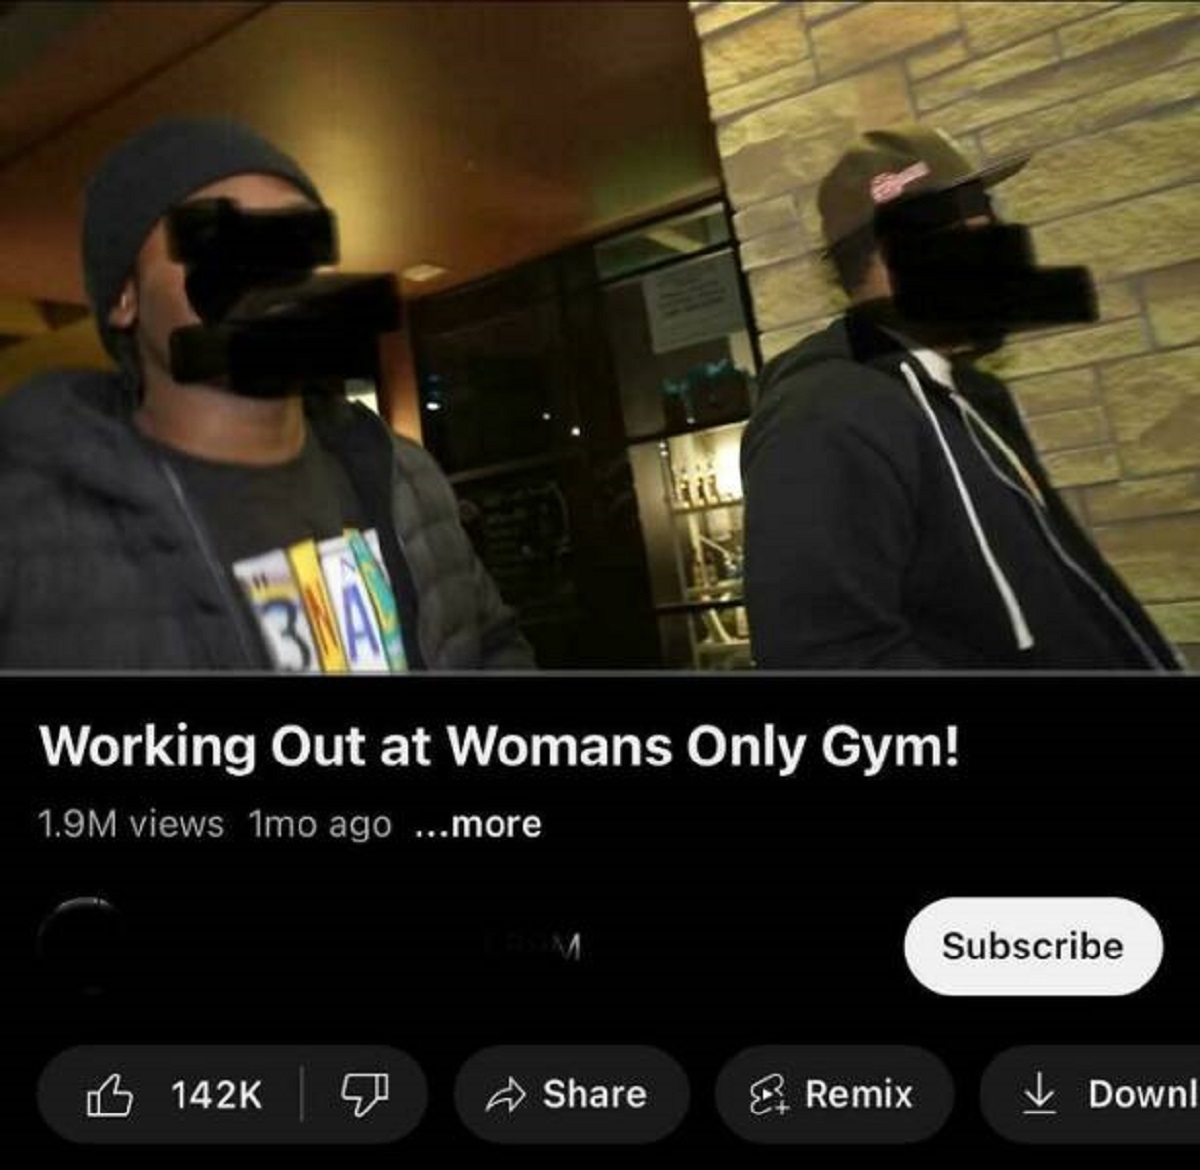 screenshot - Working Out at Womans Only Gym! 1.9M views 1mo ago ...more Crom Subscribe Remix Downl